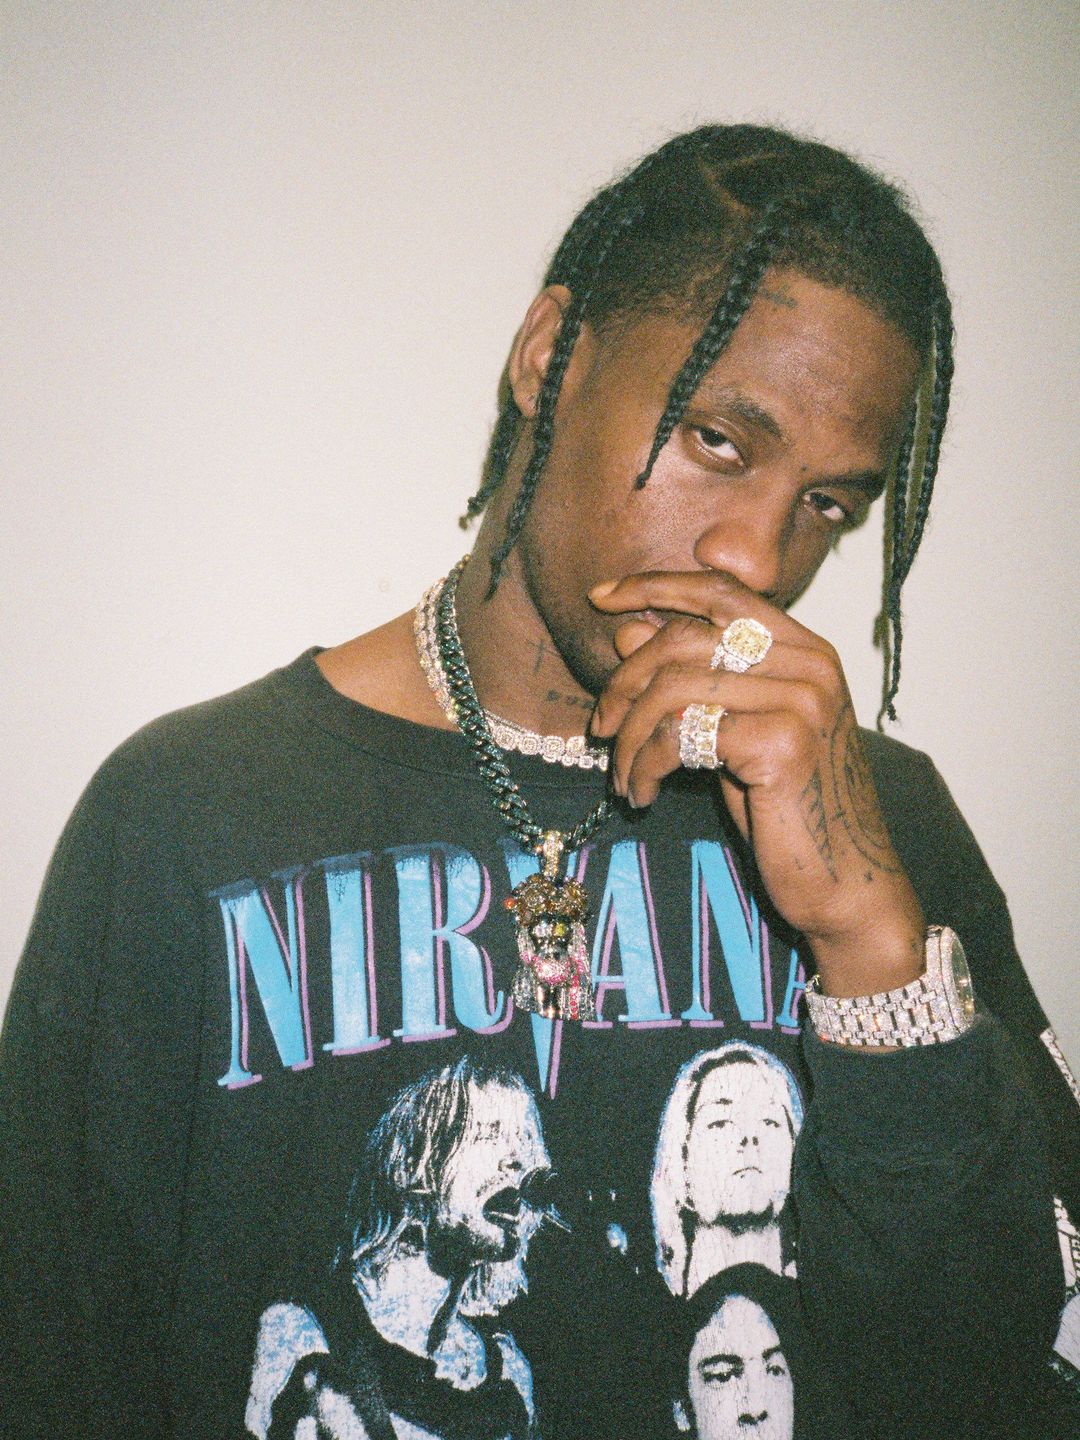 Travis Scott young age